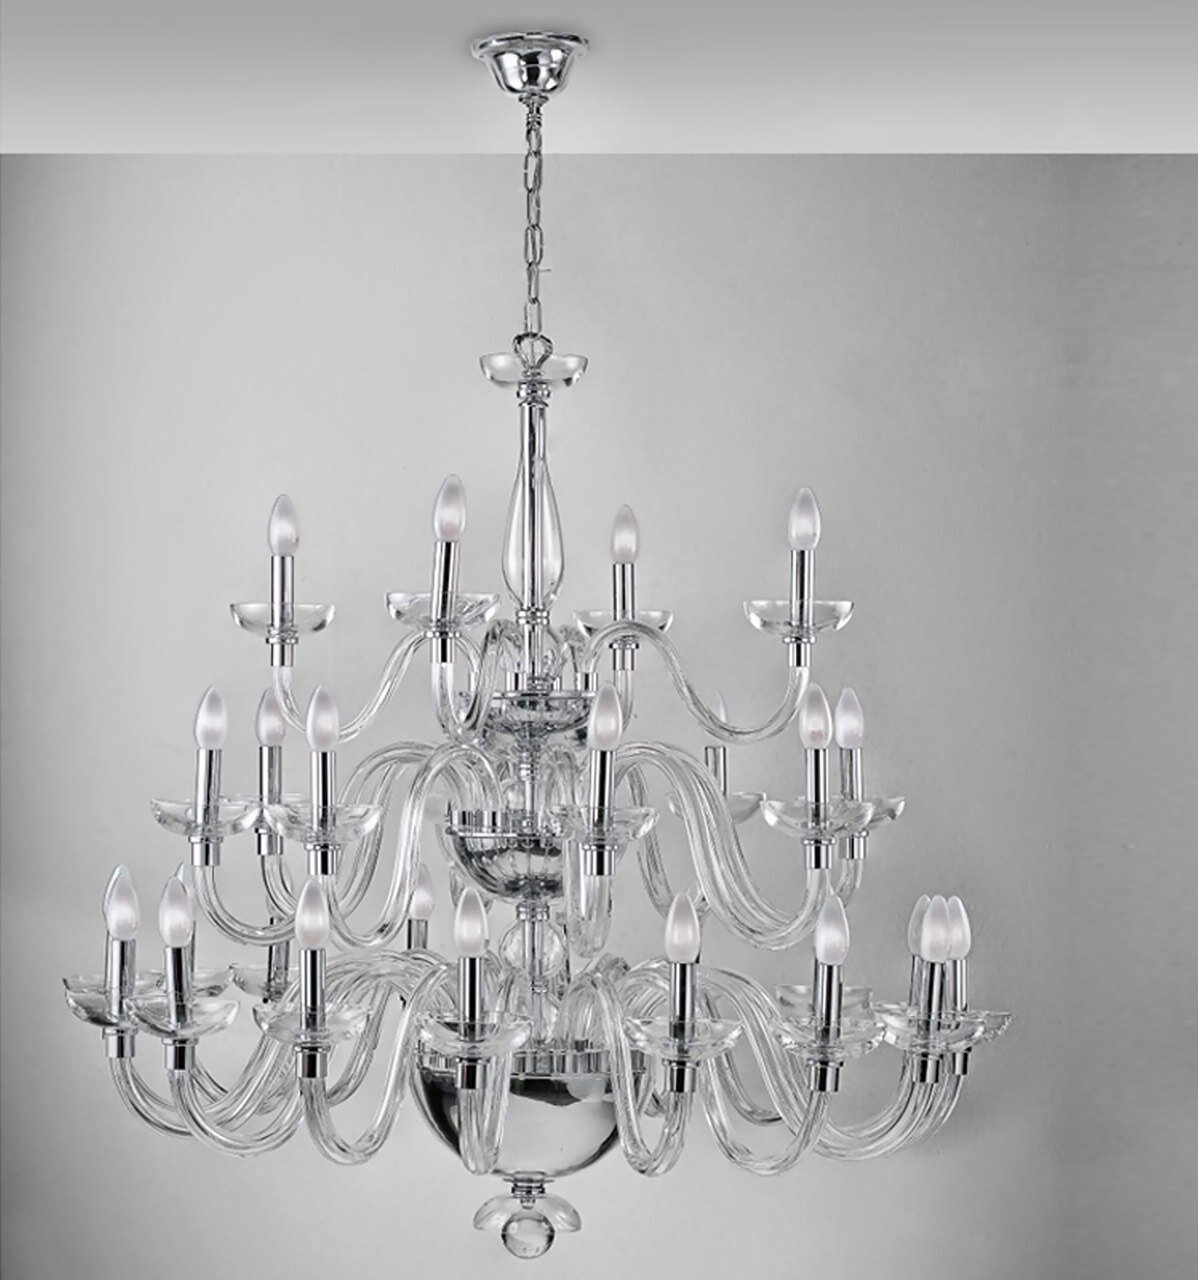 Vista Alegre Diamond Chandelier With 3 Levels And 28 Arms 48000369